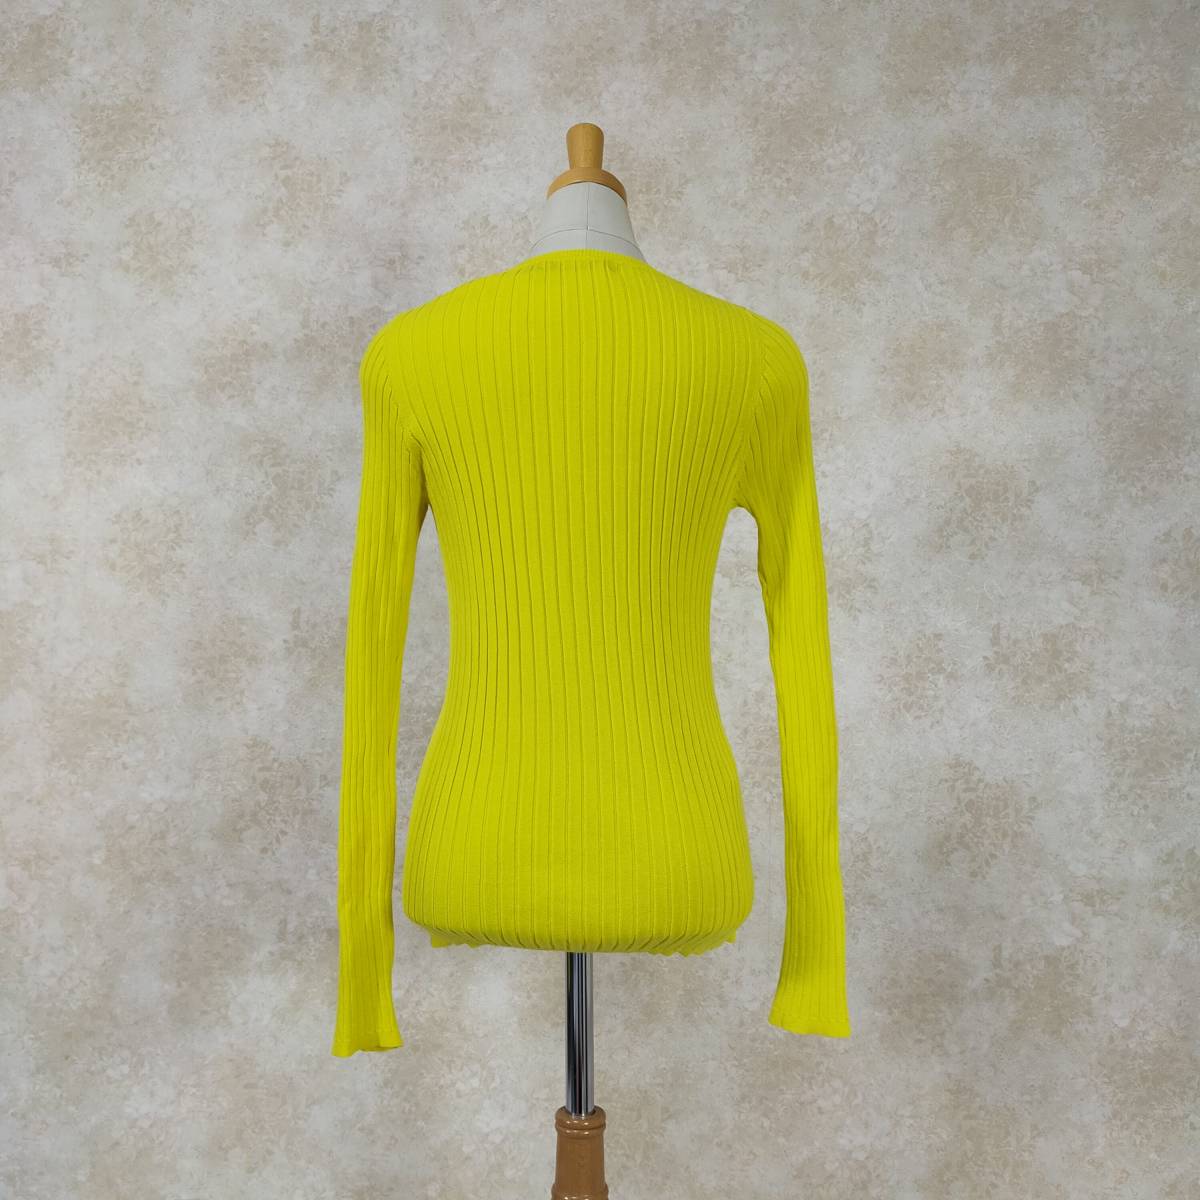  DKNY DKNY rib cardigan S yellow yellow color stretch compact button simple spring color refreshing elasticity 1921